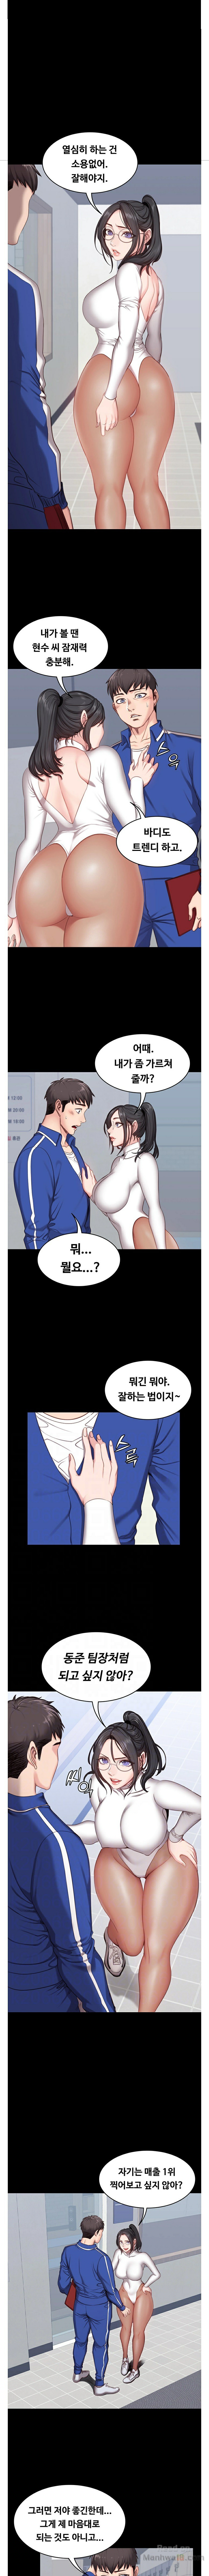 Fitness Raw - Chapter 6 Page 1